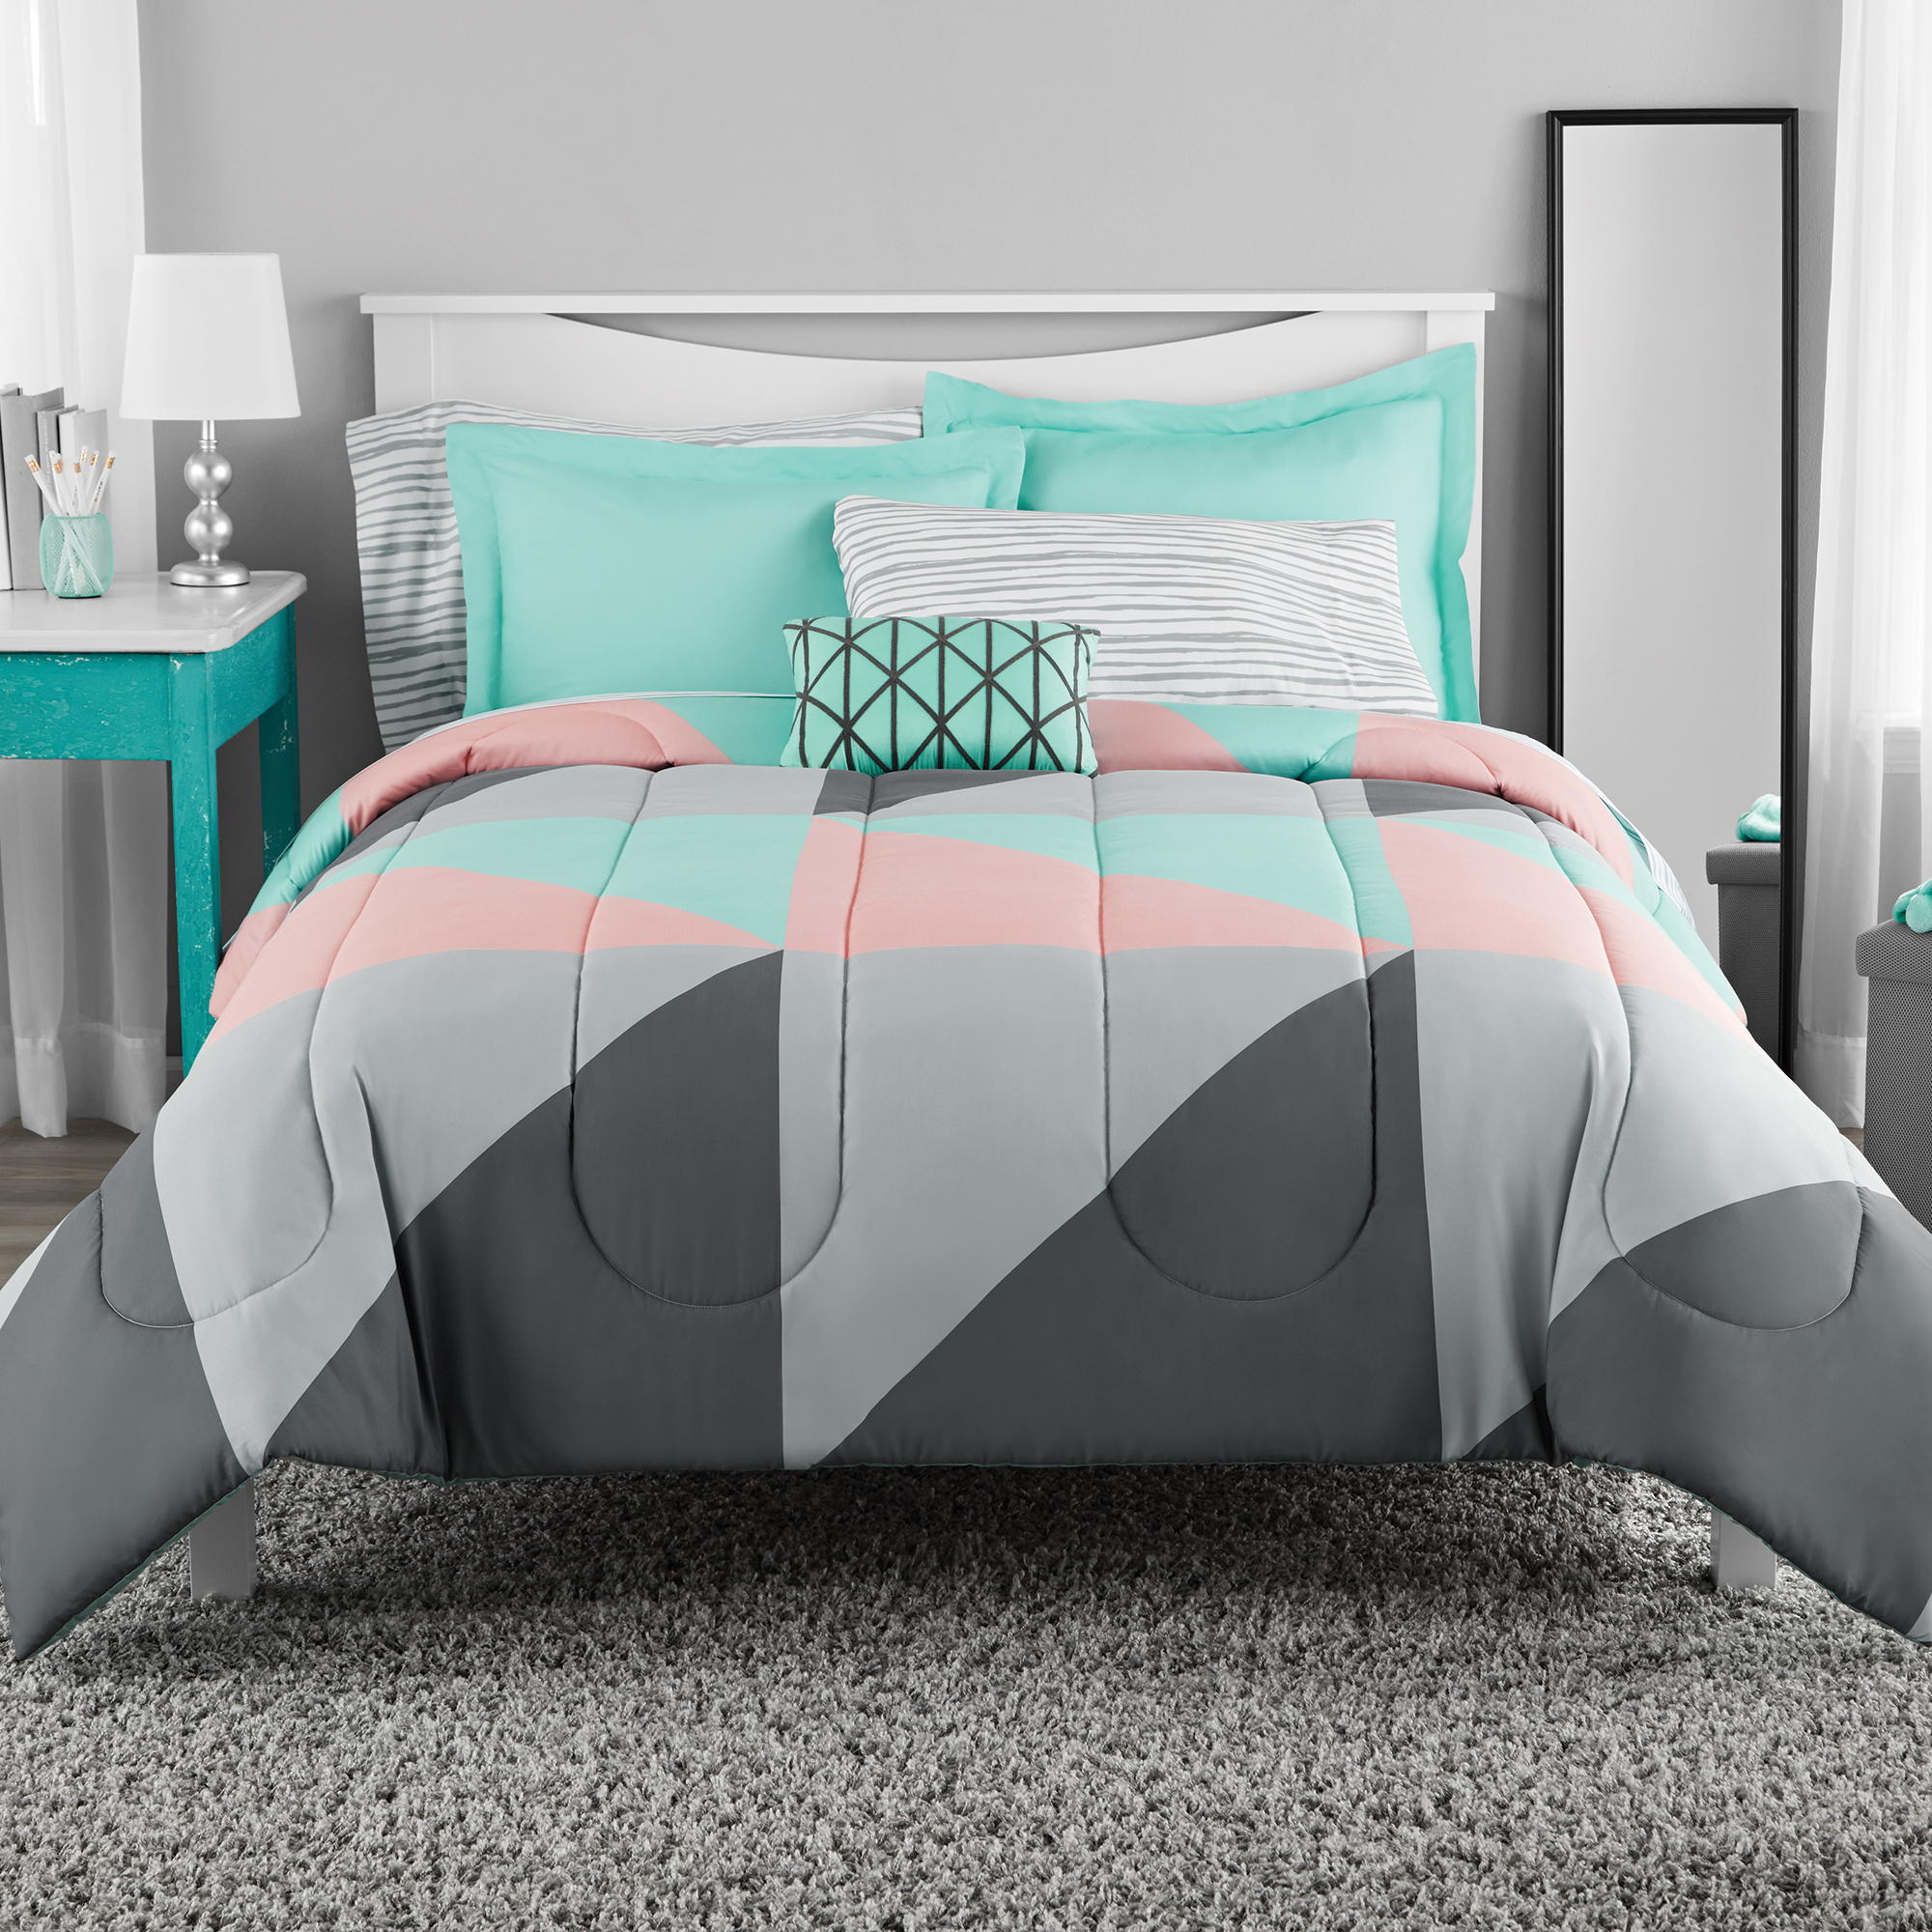 Mainstays Gray and Teal Geometric 8 Piece Bed in a Bag Comforter Set With Sheets, King - image 1 of 8